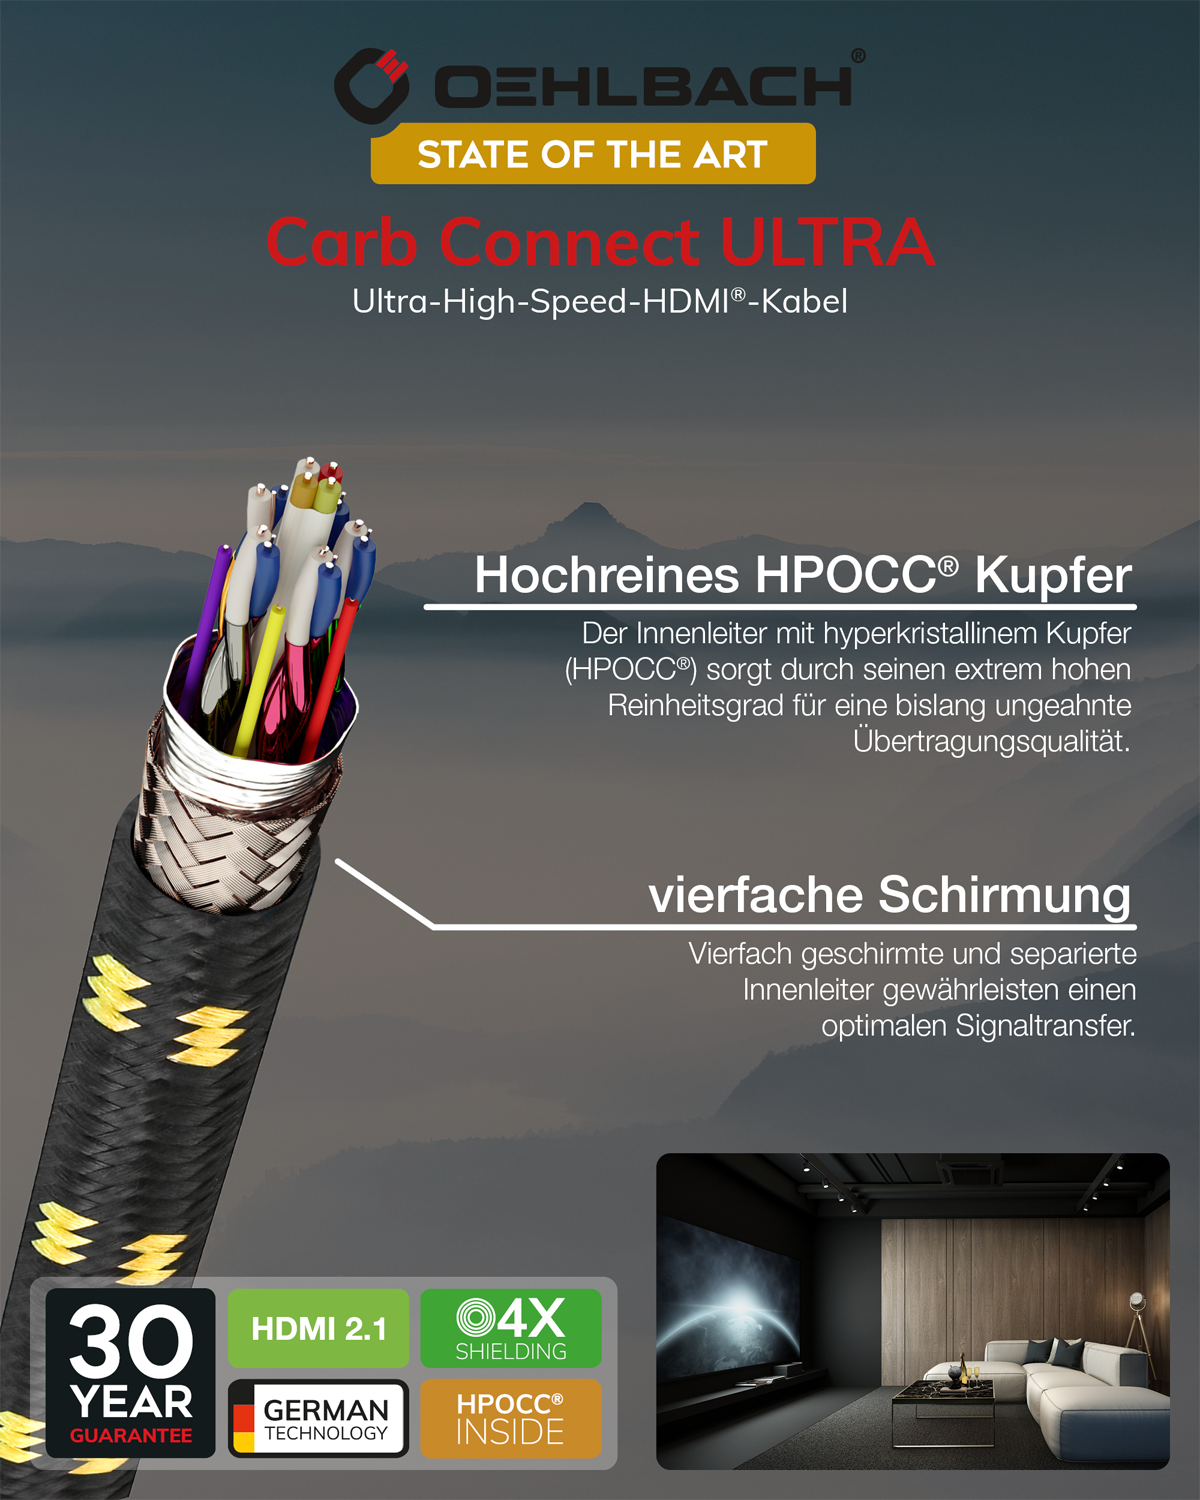 OEHLBACH Carb High Kabel Ultra HDMI End 8K Connect